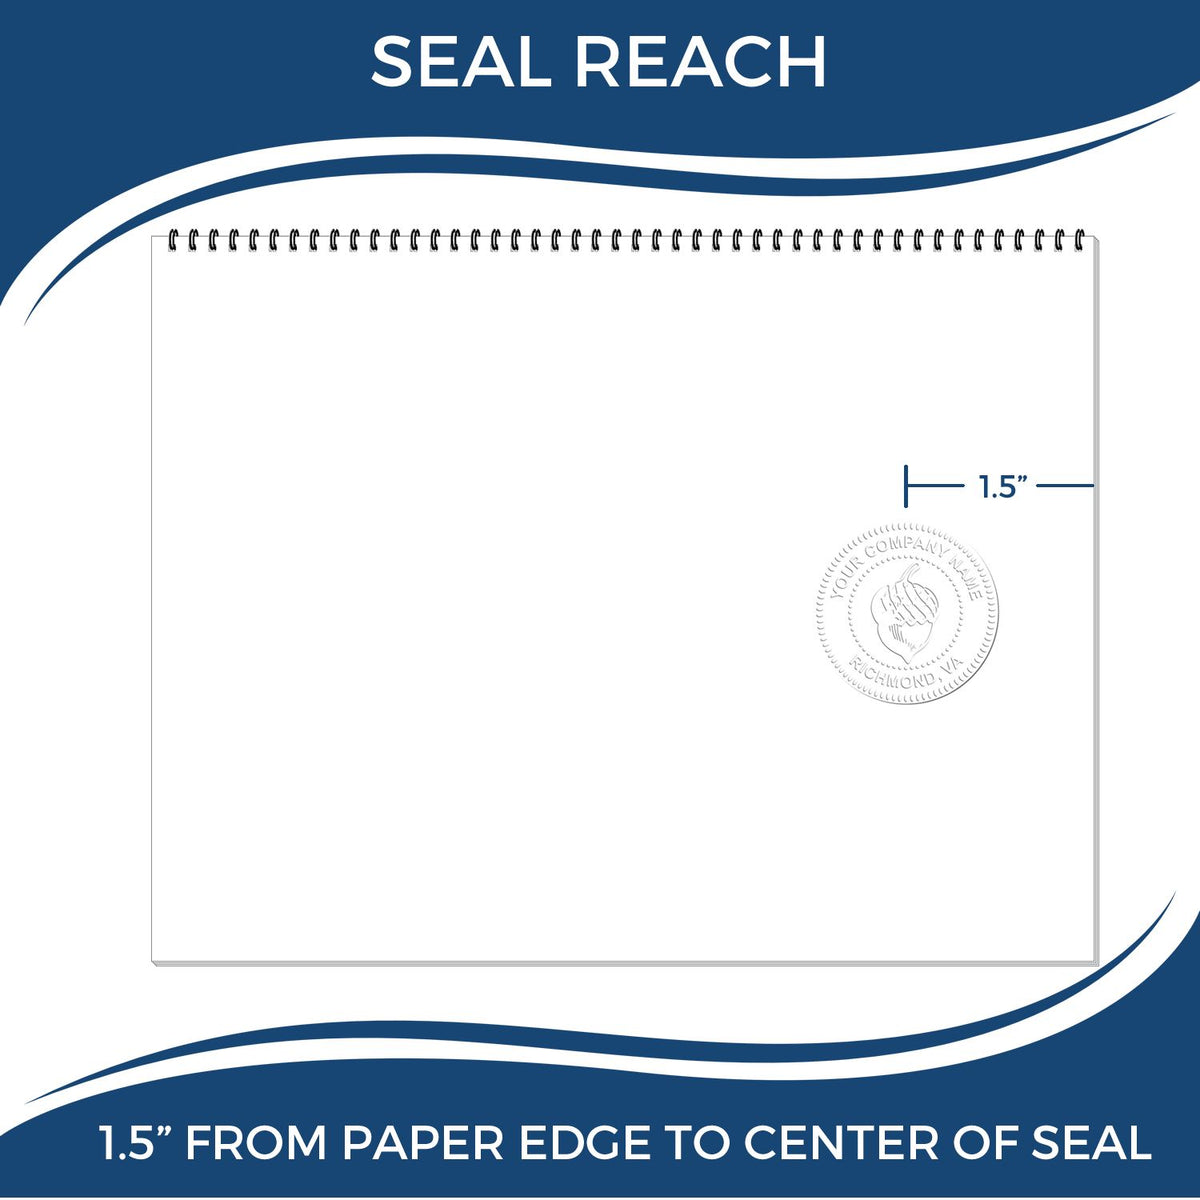 An infographic showing the seal reach which is represented by a ruler and a miniature seal image of the West Virginia Engineer Desk Seal